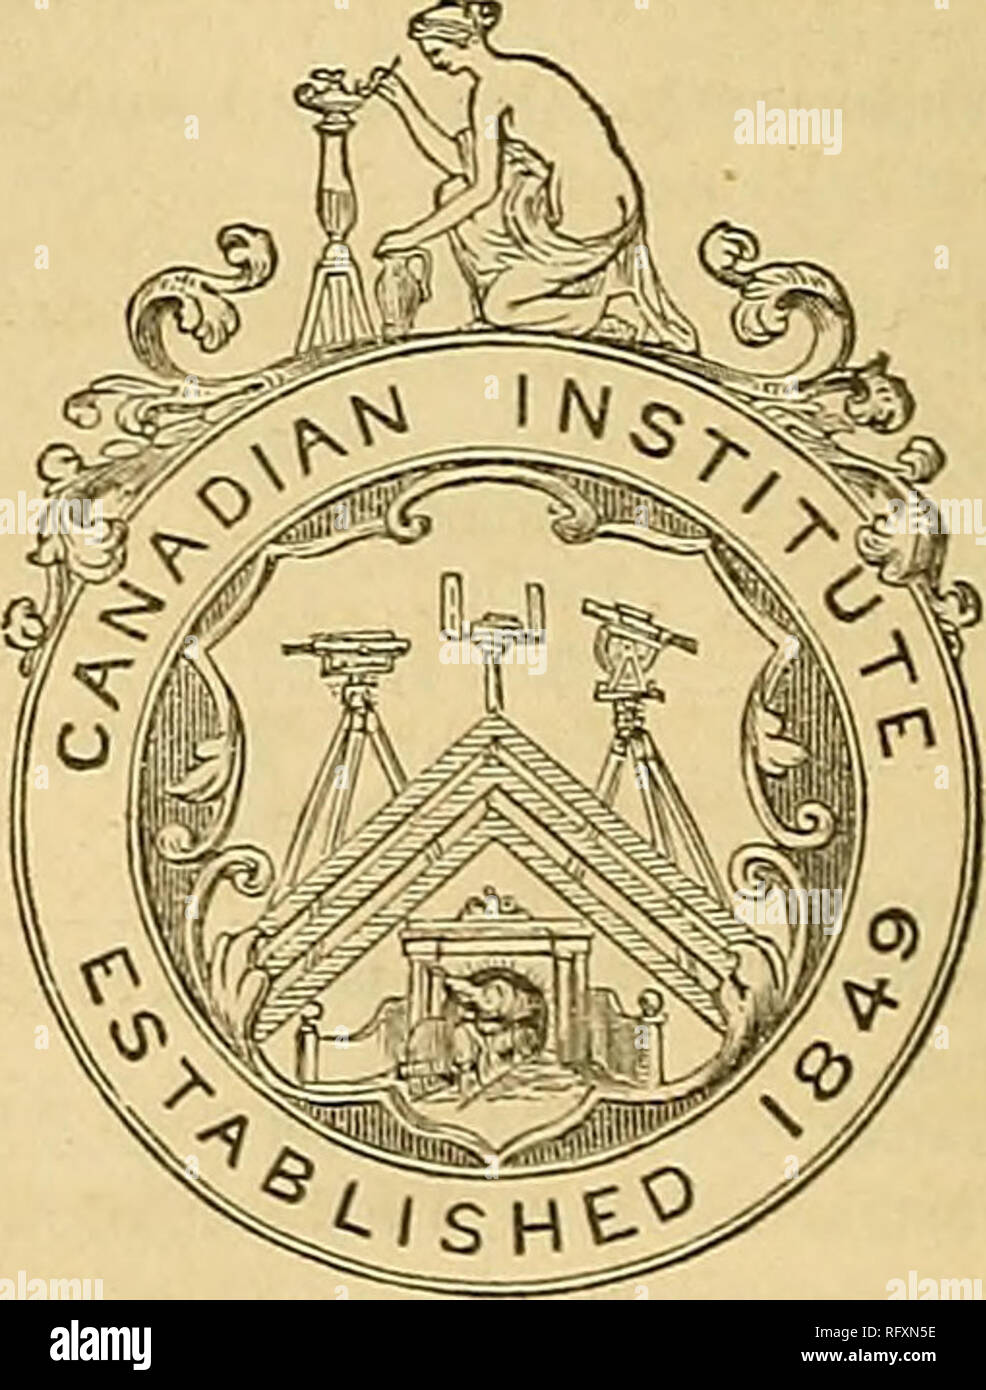 . The Canadian journal ; a repertory of industry, science, and art ; and a record of the proceedings of the Canadian Institute. 184 PEOCEEDIFGS OF THE CANADIAN INSTITUE. [1853. Mitchella Repens.. Partiiilgc Beny. Astii-( ?) Solida!;-o( ?) GolJeu Rod. Gnaphalium (?) Cudweed. Lobelia Syphilitica Gi-eat Lobelia. &quot; Inflata Indian Tobacco. &quot; Kalmii. Gaultheria Procumbens Winter Green May. Epigoja Repens Trailing Arbutus April. Pyrola Rotunditblia Round Leaved Pyrola.July. &quot; Sccunda One Sided Pyrola July. Cbimapbila Umbellata Pi iuce's Pine June. Tricutidis Americana Startiower May. L Stock Photo